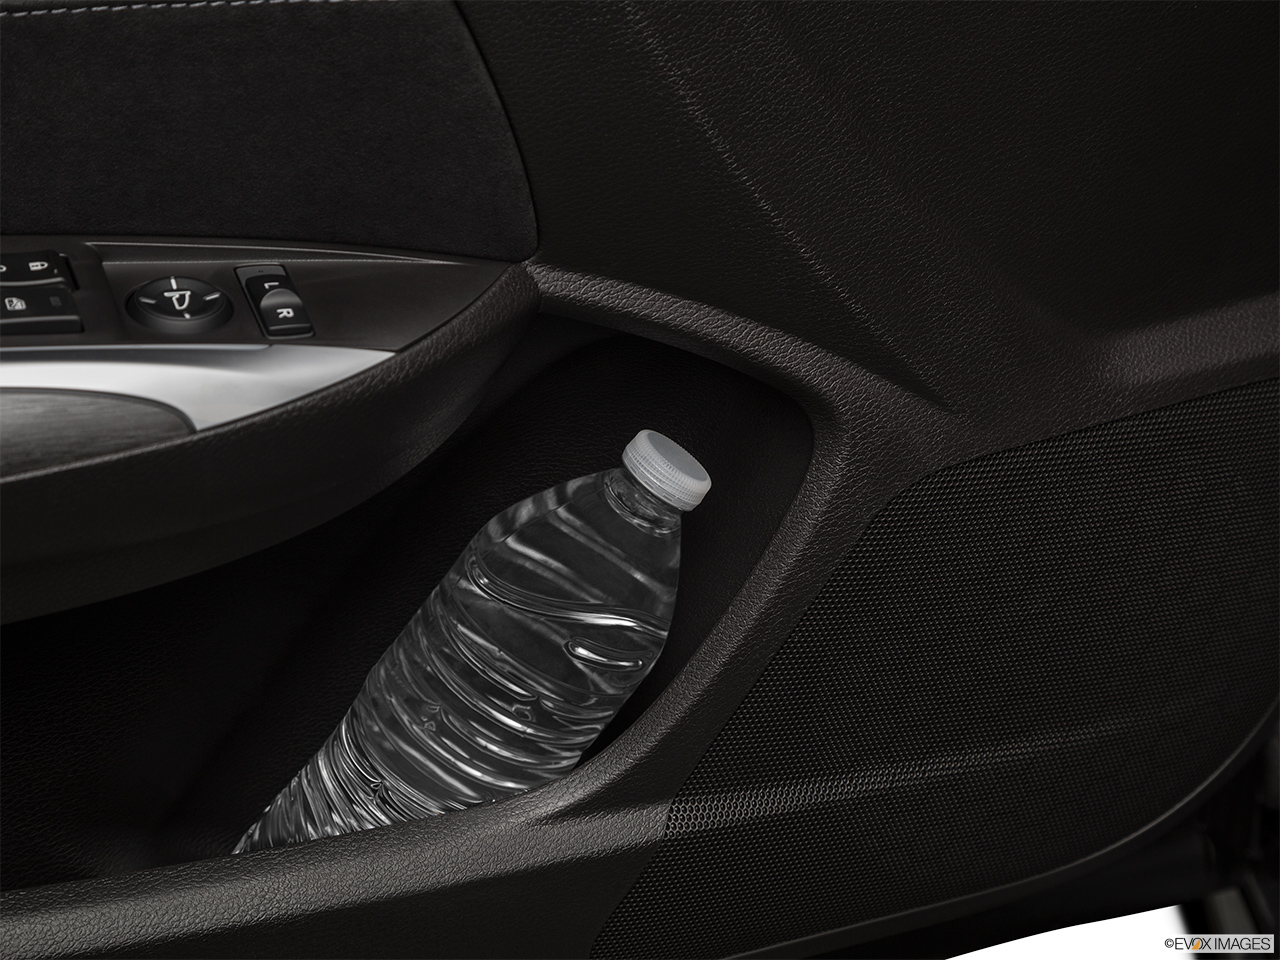 2019 Acura TLX 3.5L Cup holder prop (tertiary). 